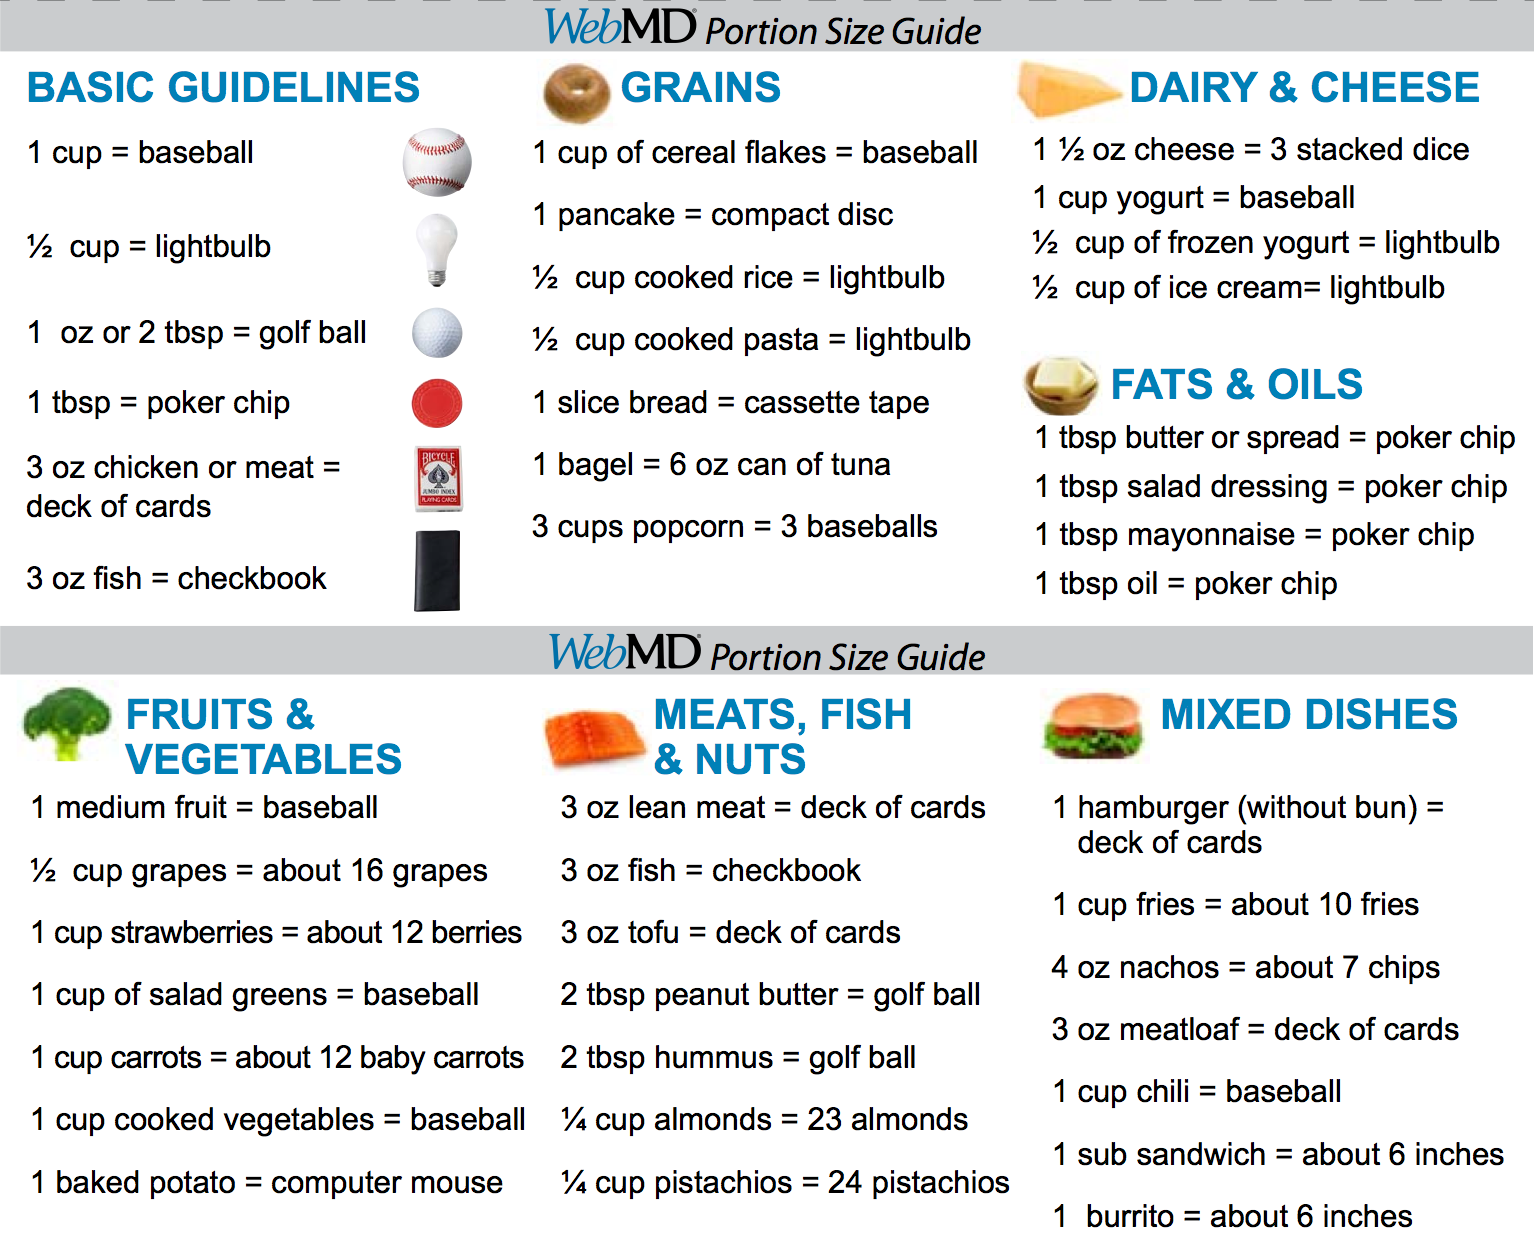 http://www.webmd.com/diet/printable/wallet-portion-control-size-guide